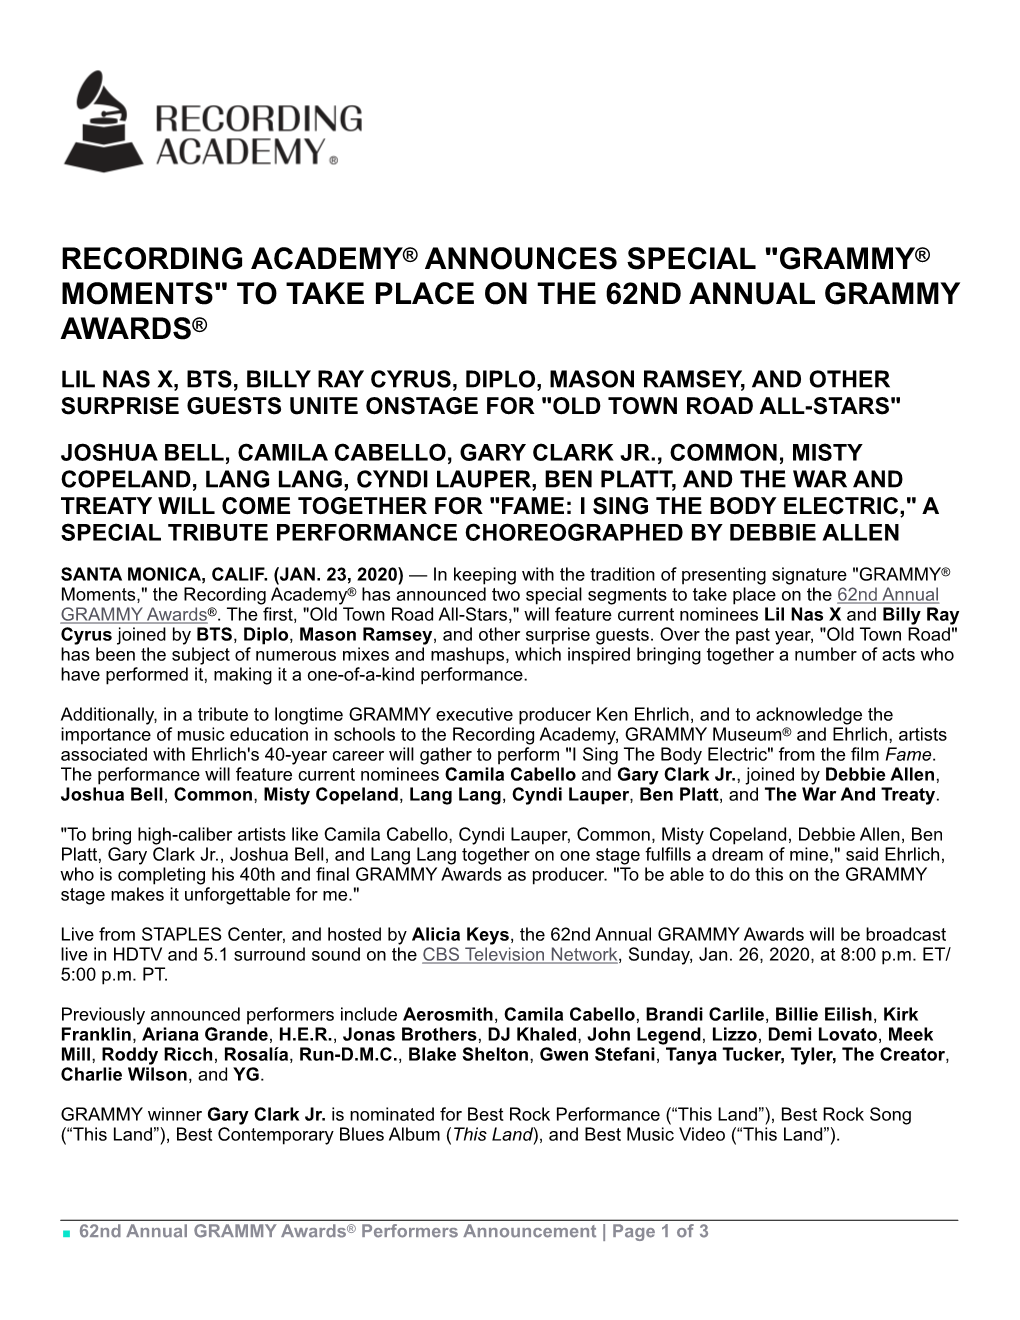 Recording Academy® Announces Special "Grammy® Moments" to Take Place on the 62Nd Annual Grammy Awards®